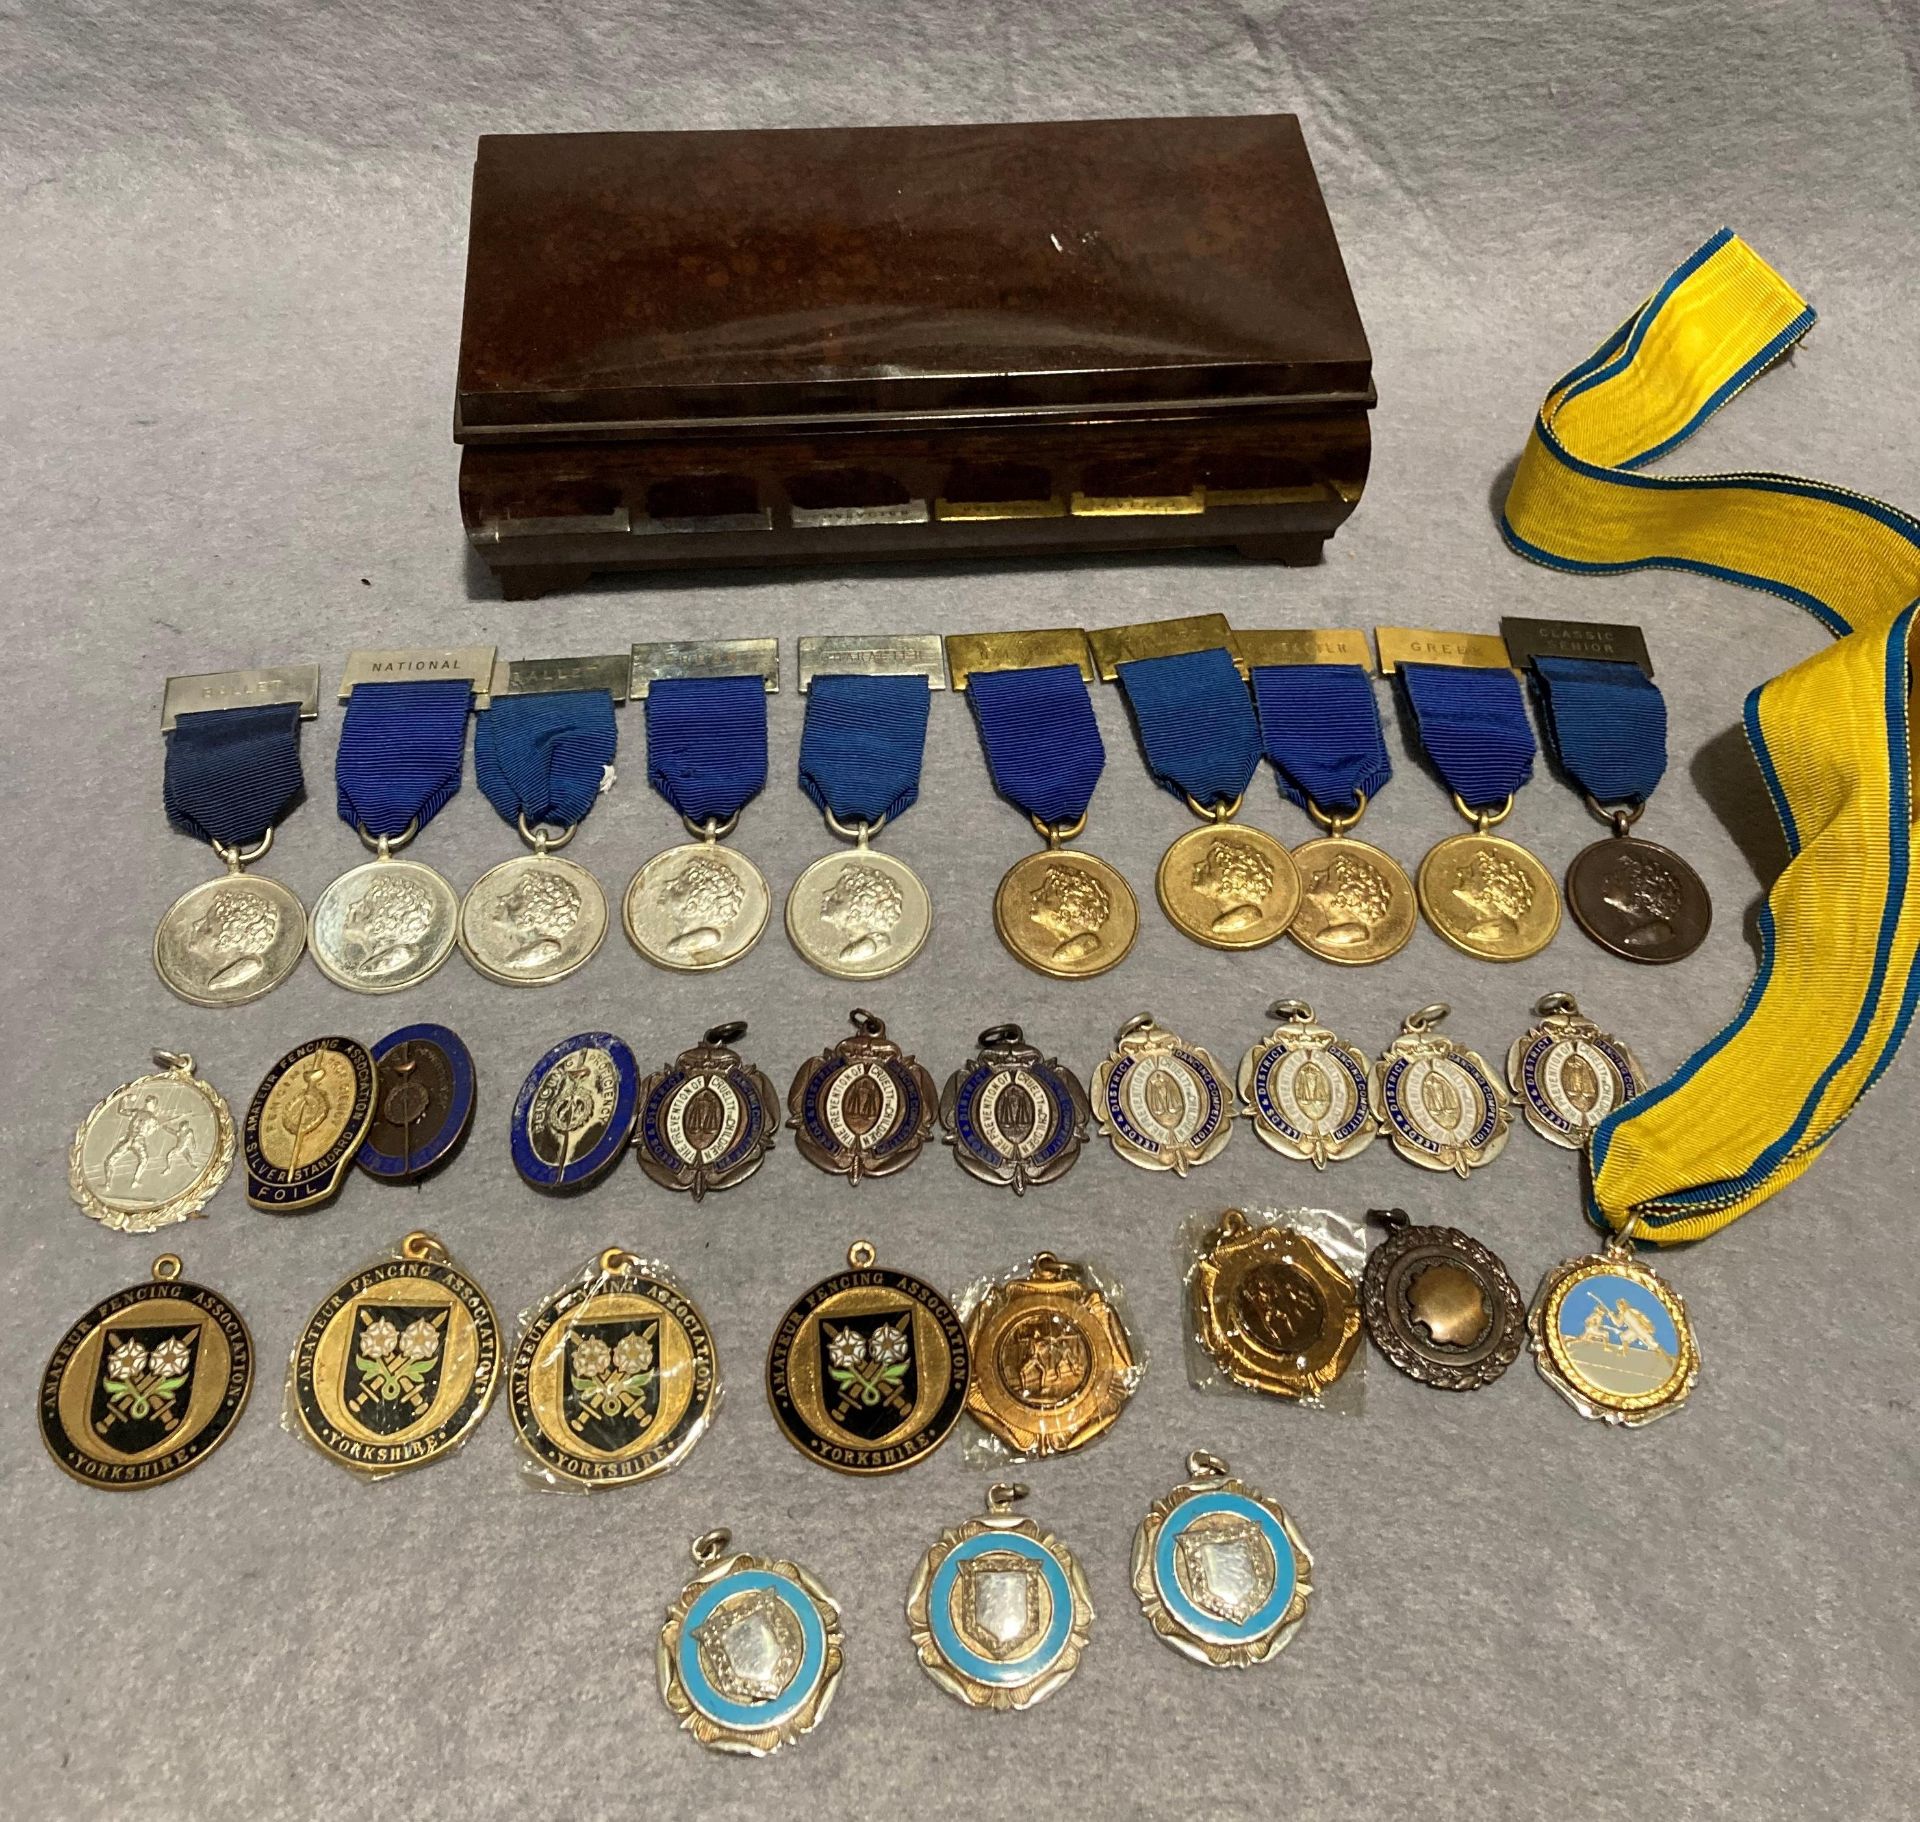 Brown Bakelite box and thirty assorted medals/awards for dancing,